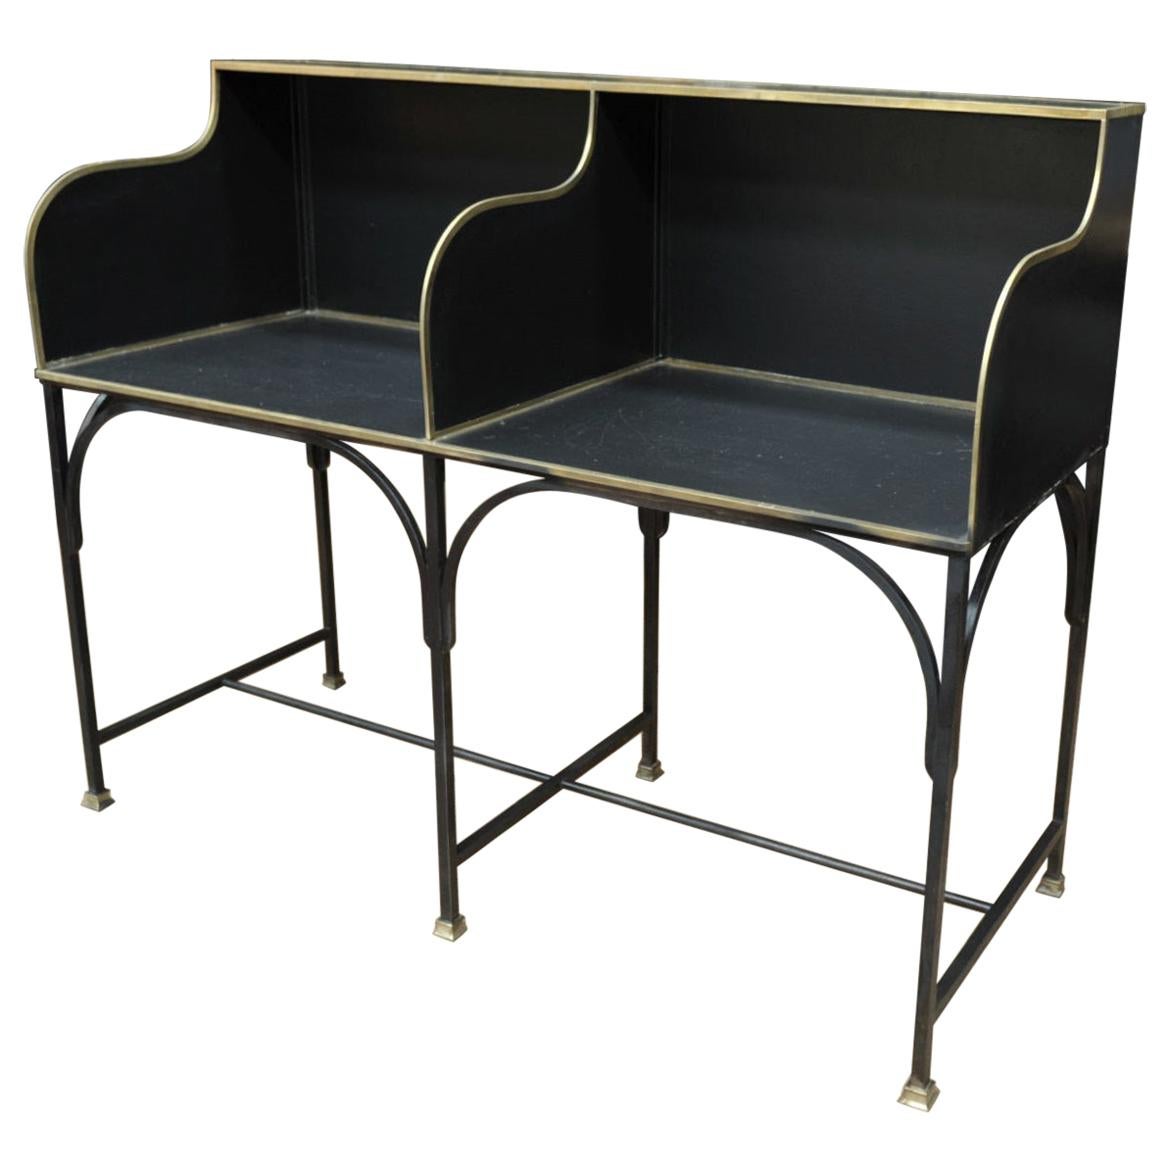 French Double Seat Metal and Brass Bank Desk Counter, Circa 1910 For Sale